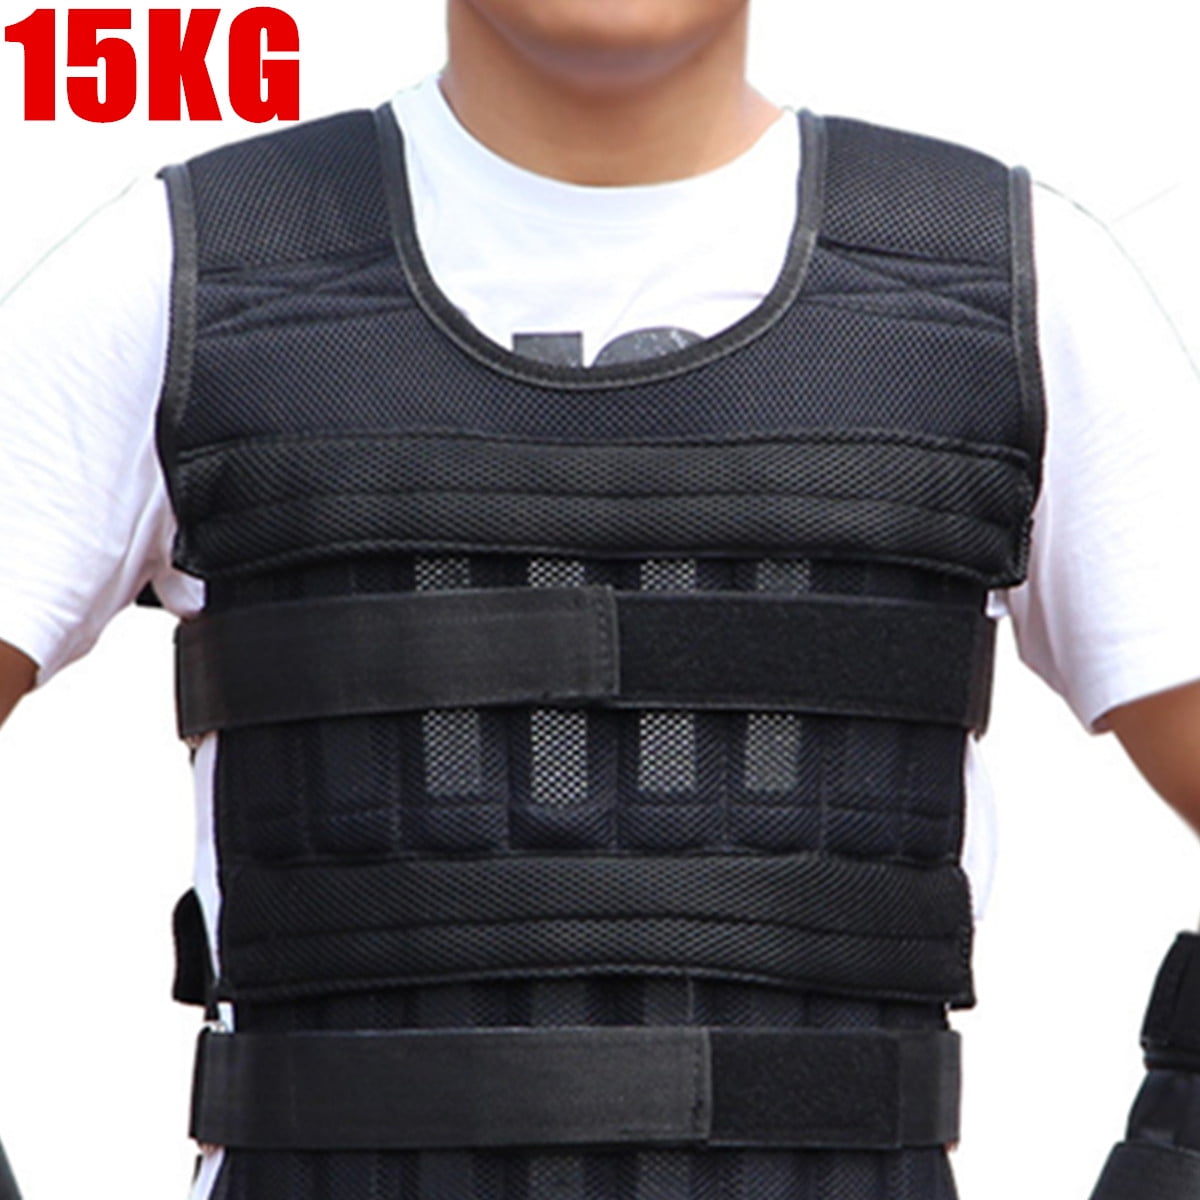 15KG Exercise Weight Vest Weighted Adjustable Fitness Training Workout Sports 